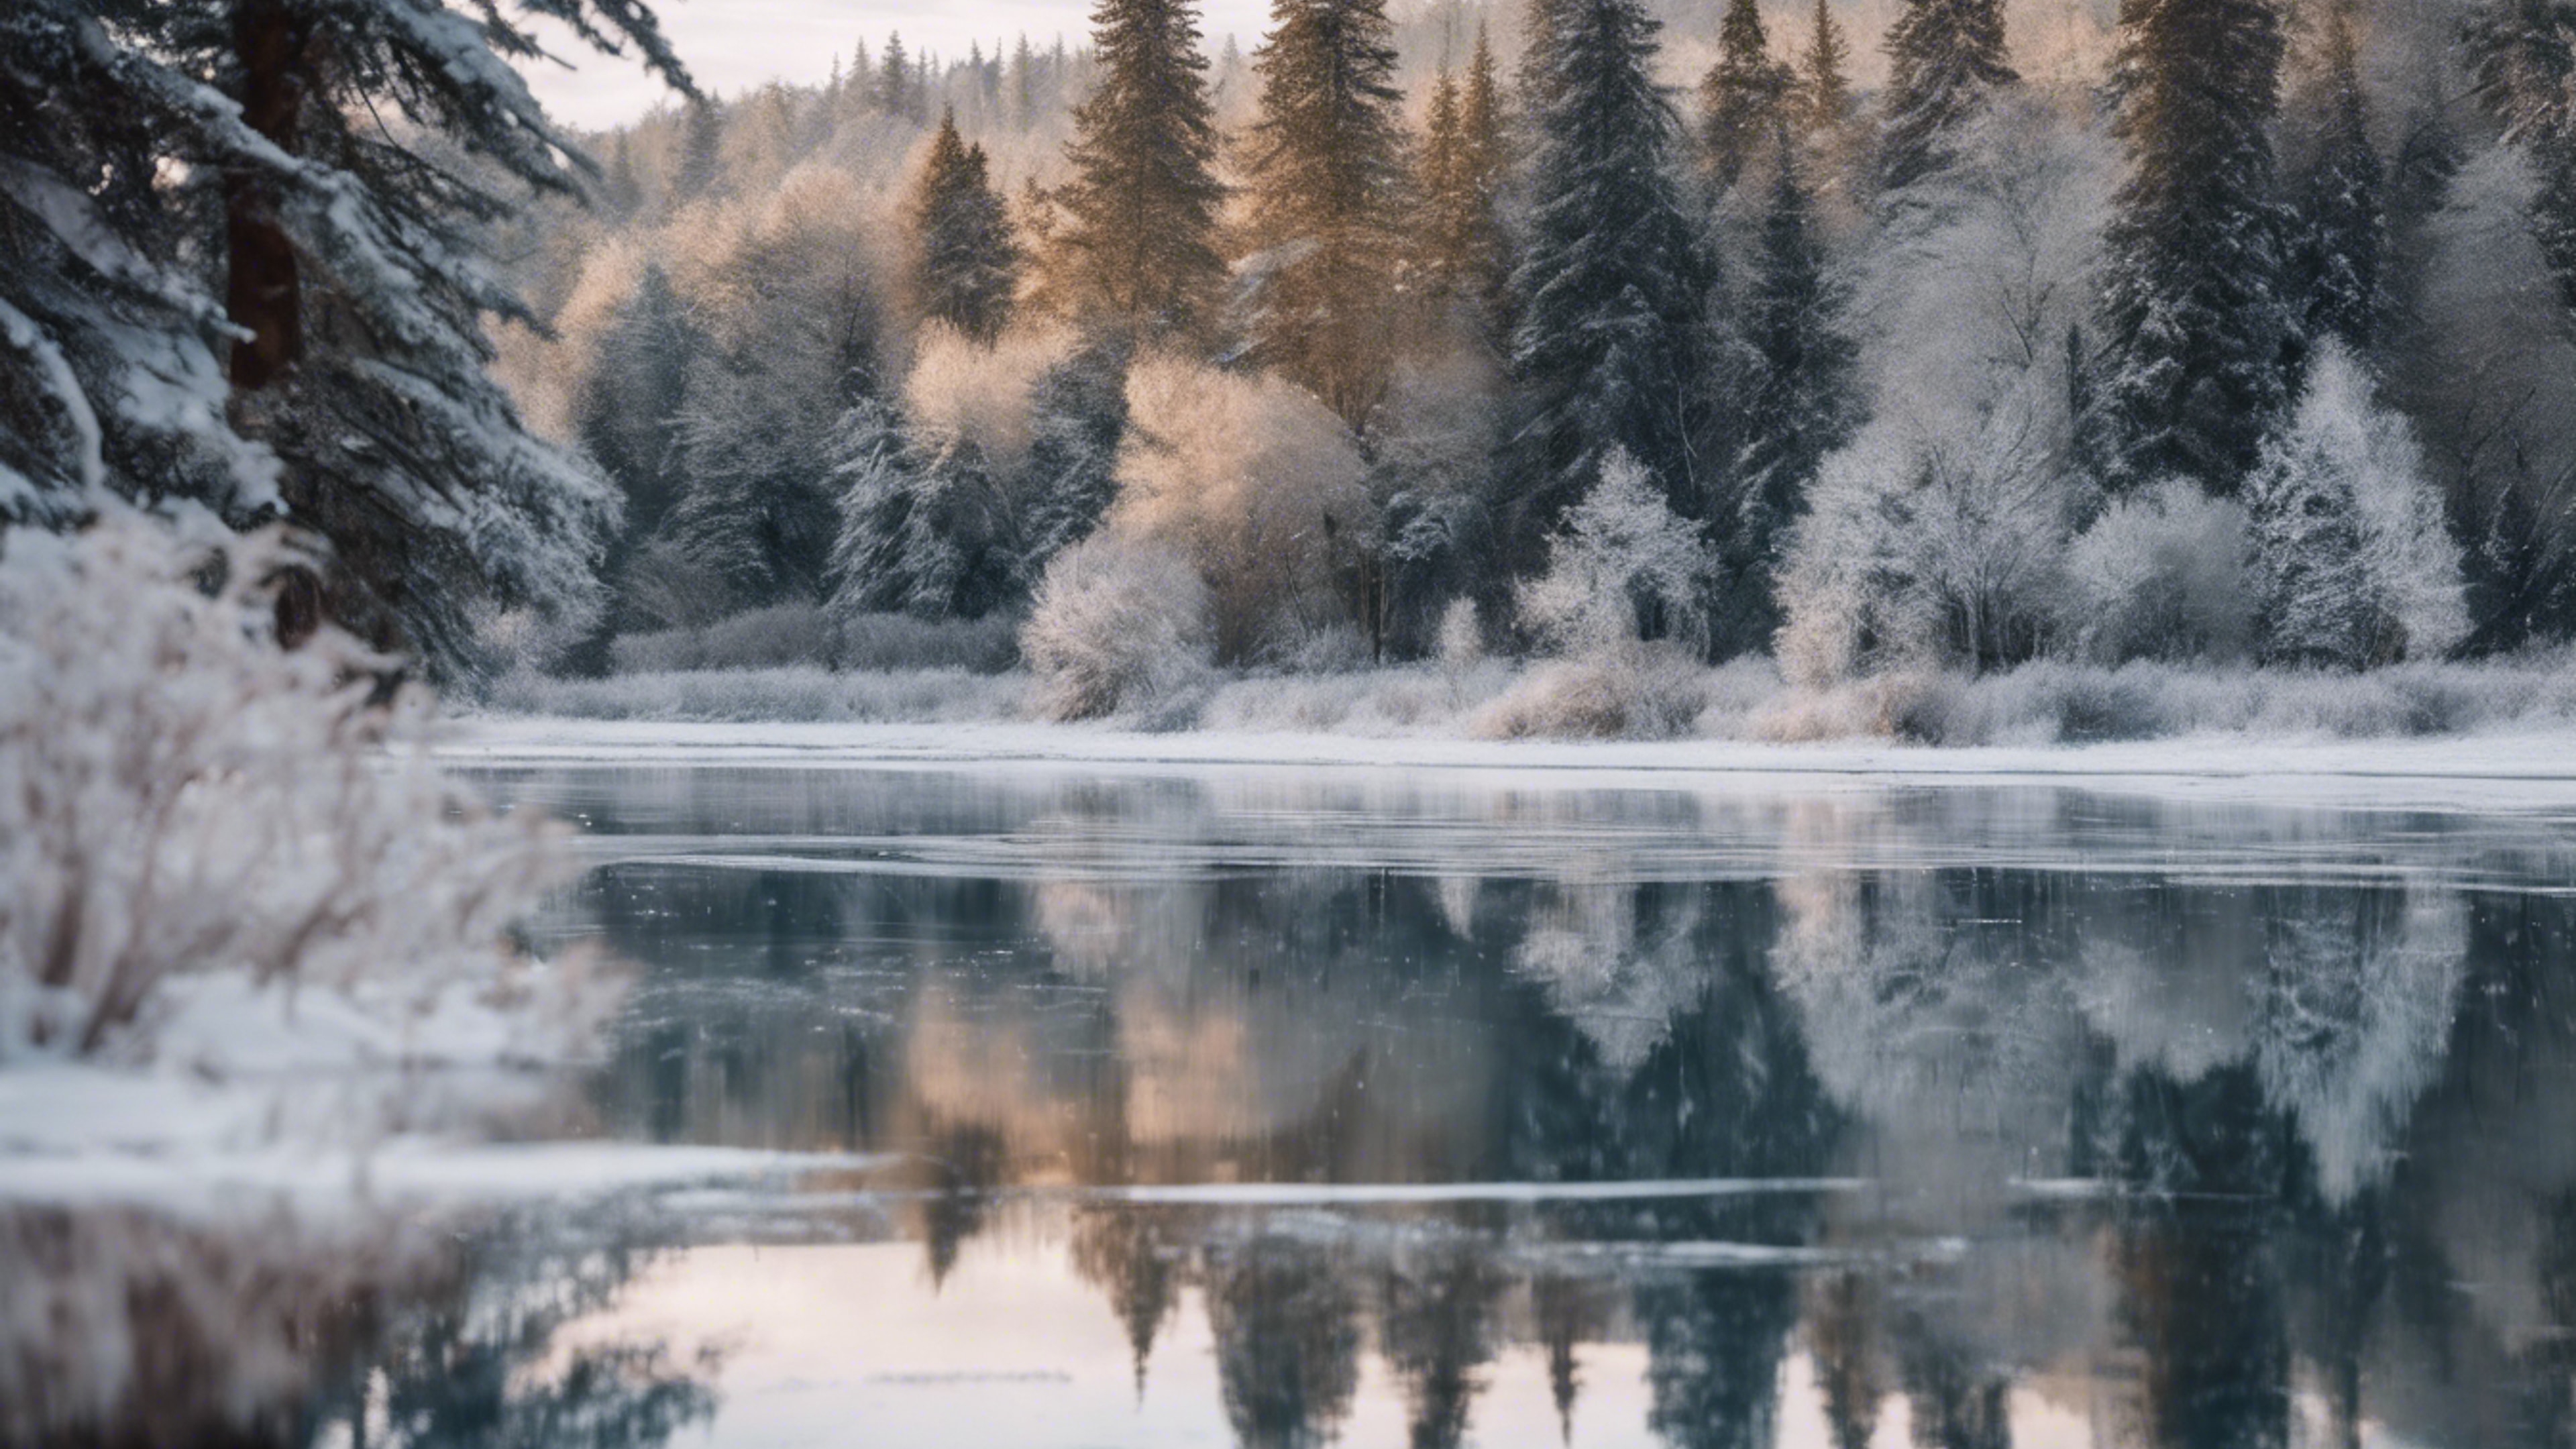 A placid lake frozen over, with the surrounding trees reflected perfectly on its shiny surface. Wallpaper[3ae9fef6663b492b966d]